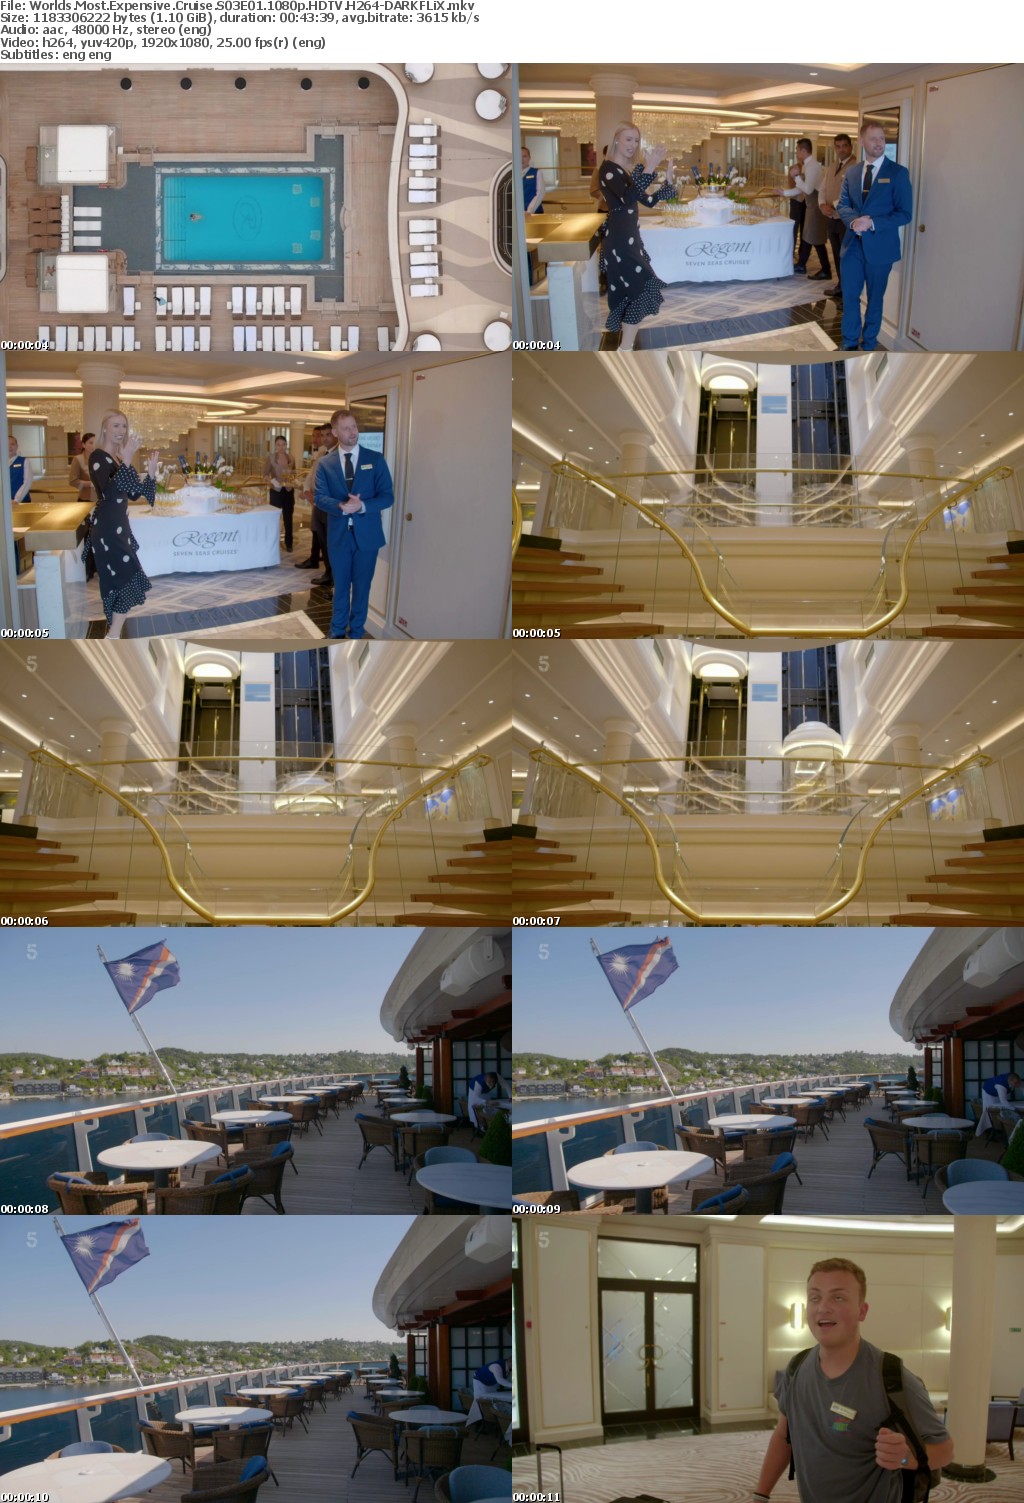 Worlds Most Expensive Cruise S03E01 1080p HDTV H264-DARKFLiX